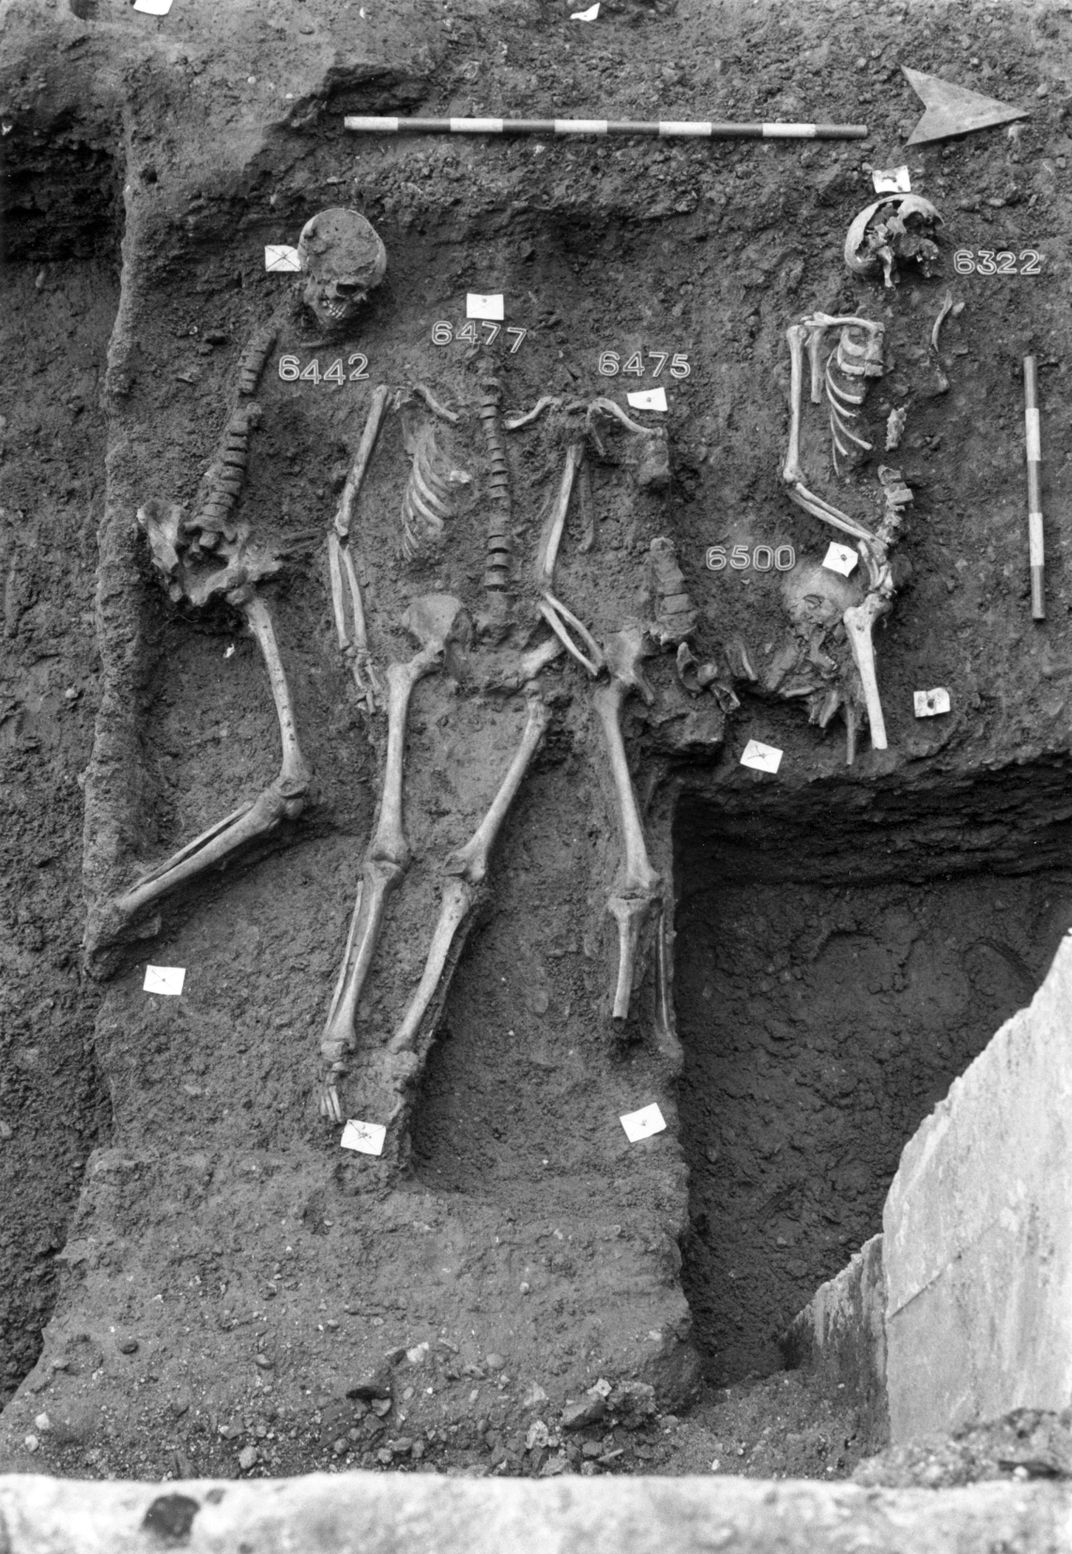 Several skeletons in a mass burial bit.